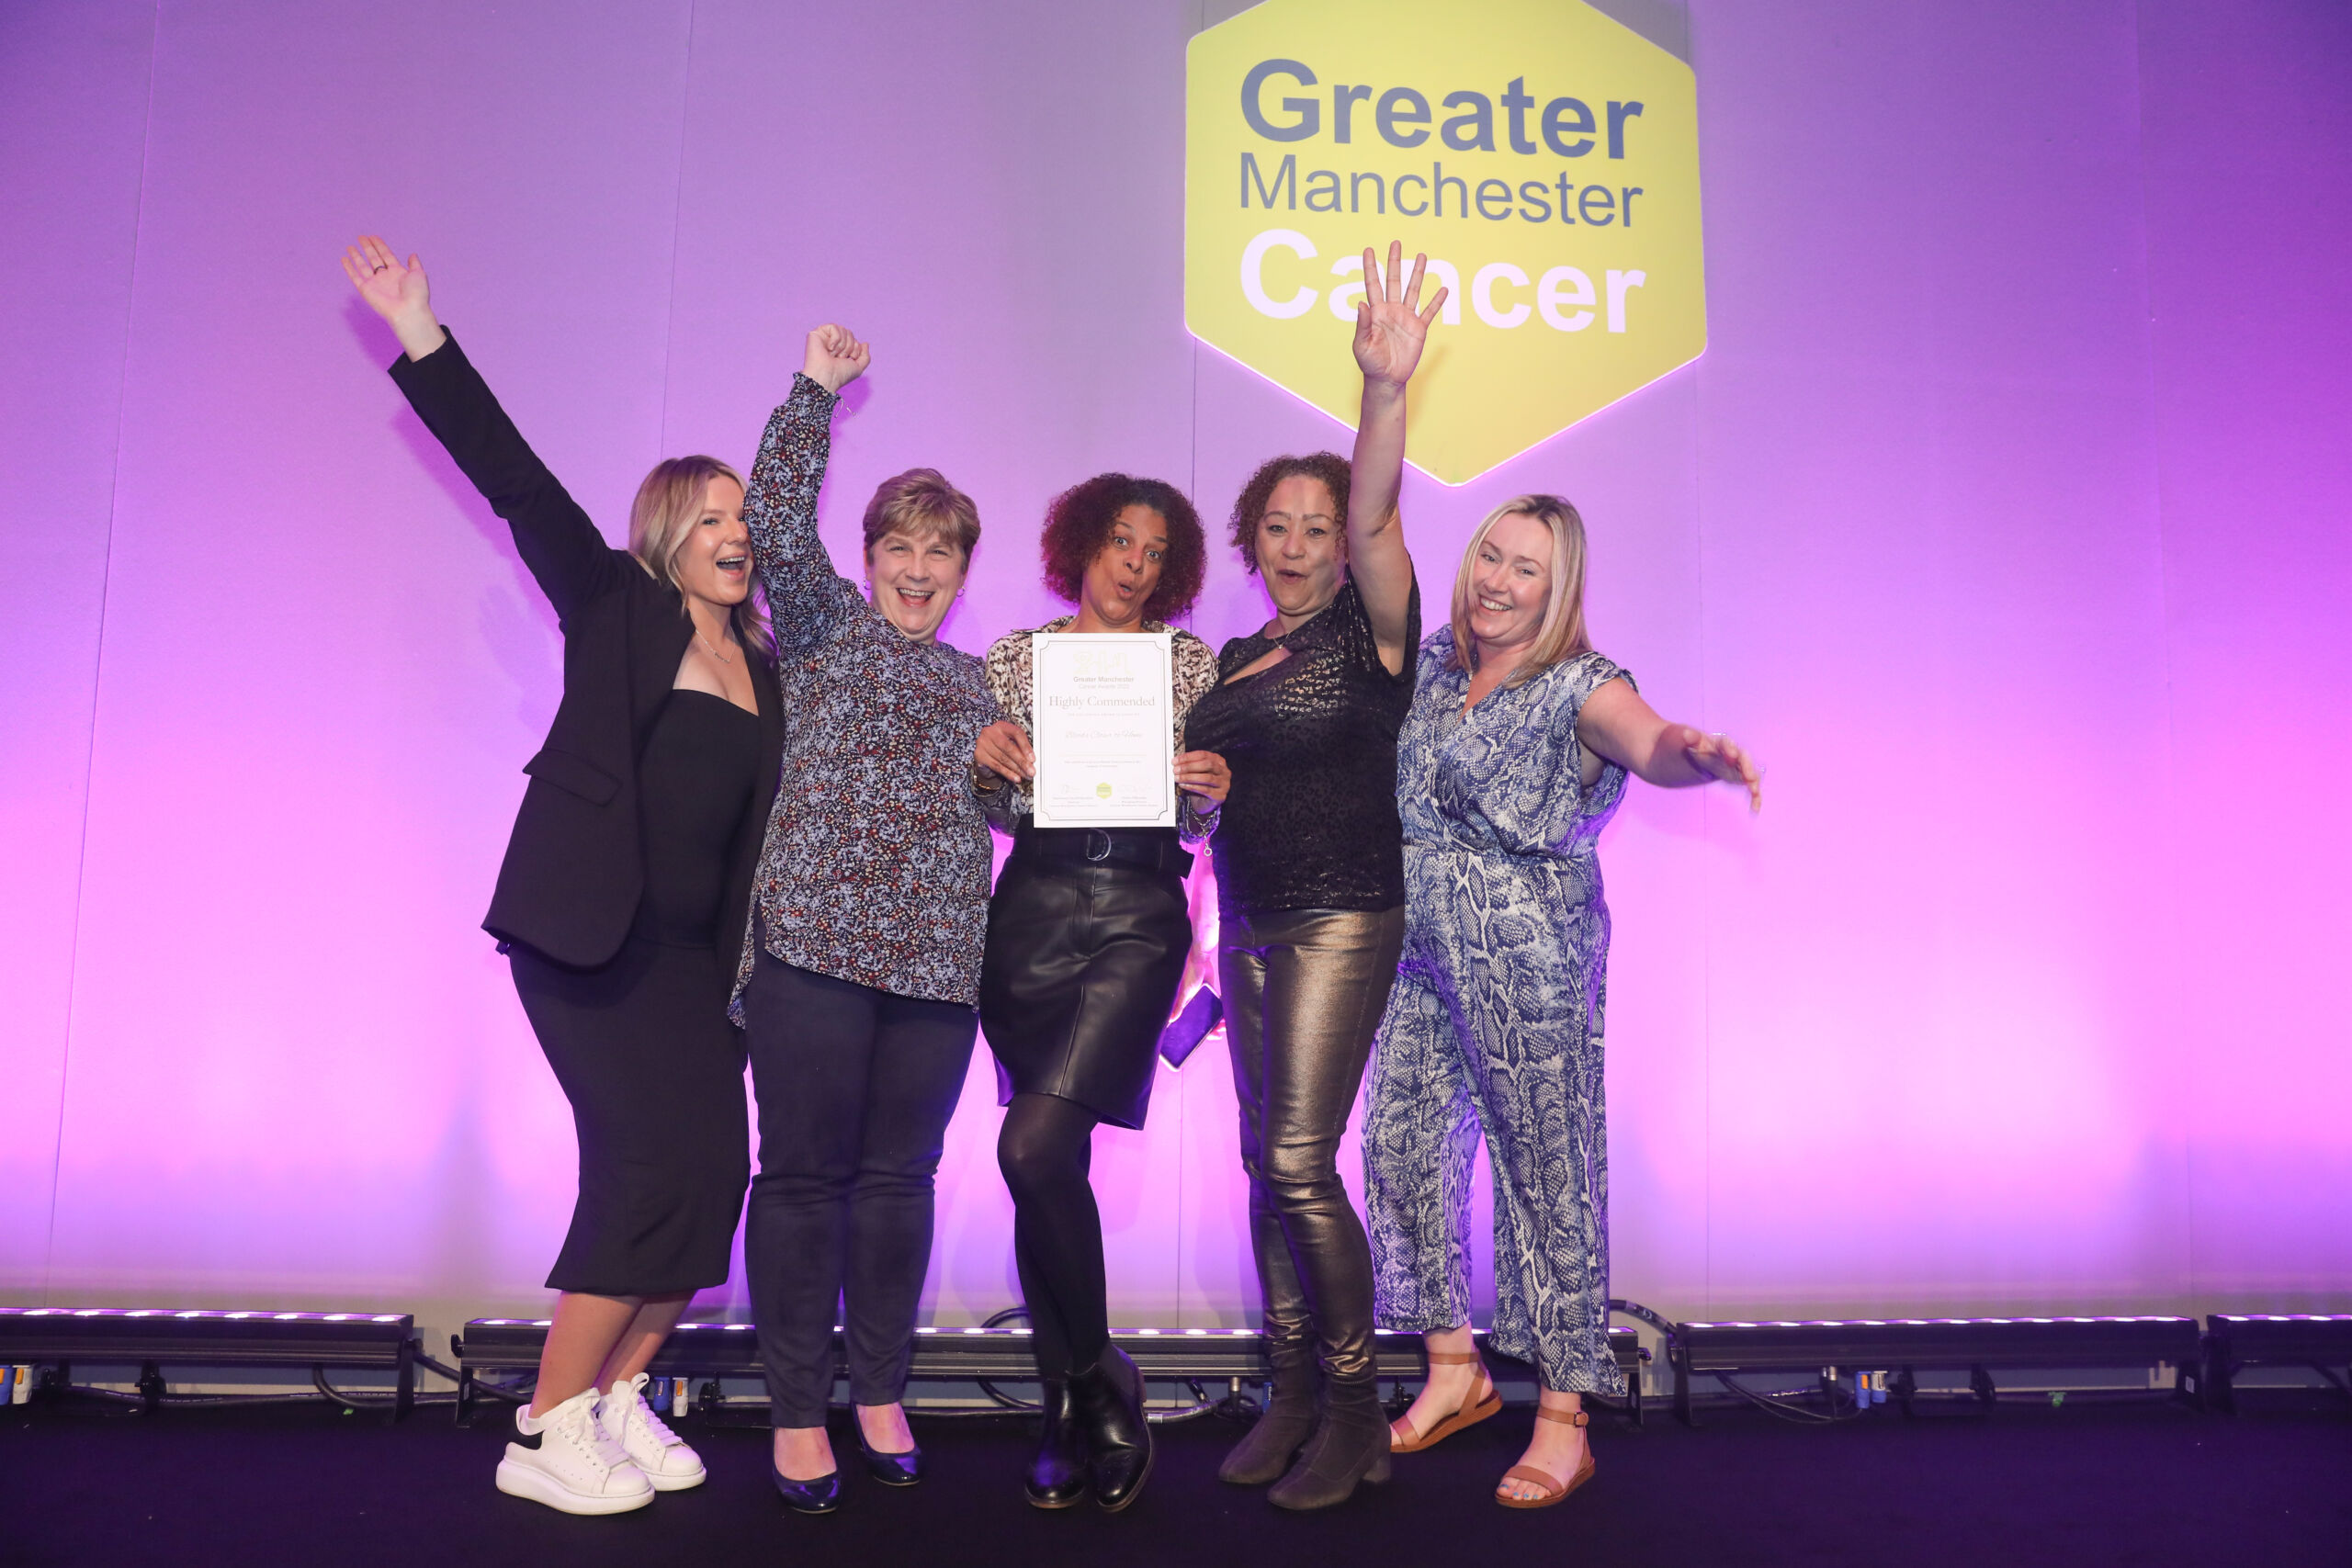 5 women pose with an awards certifucate on stage with their arms in the air